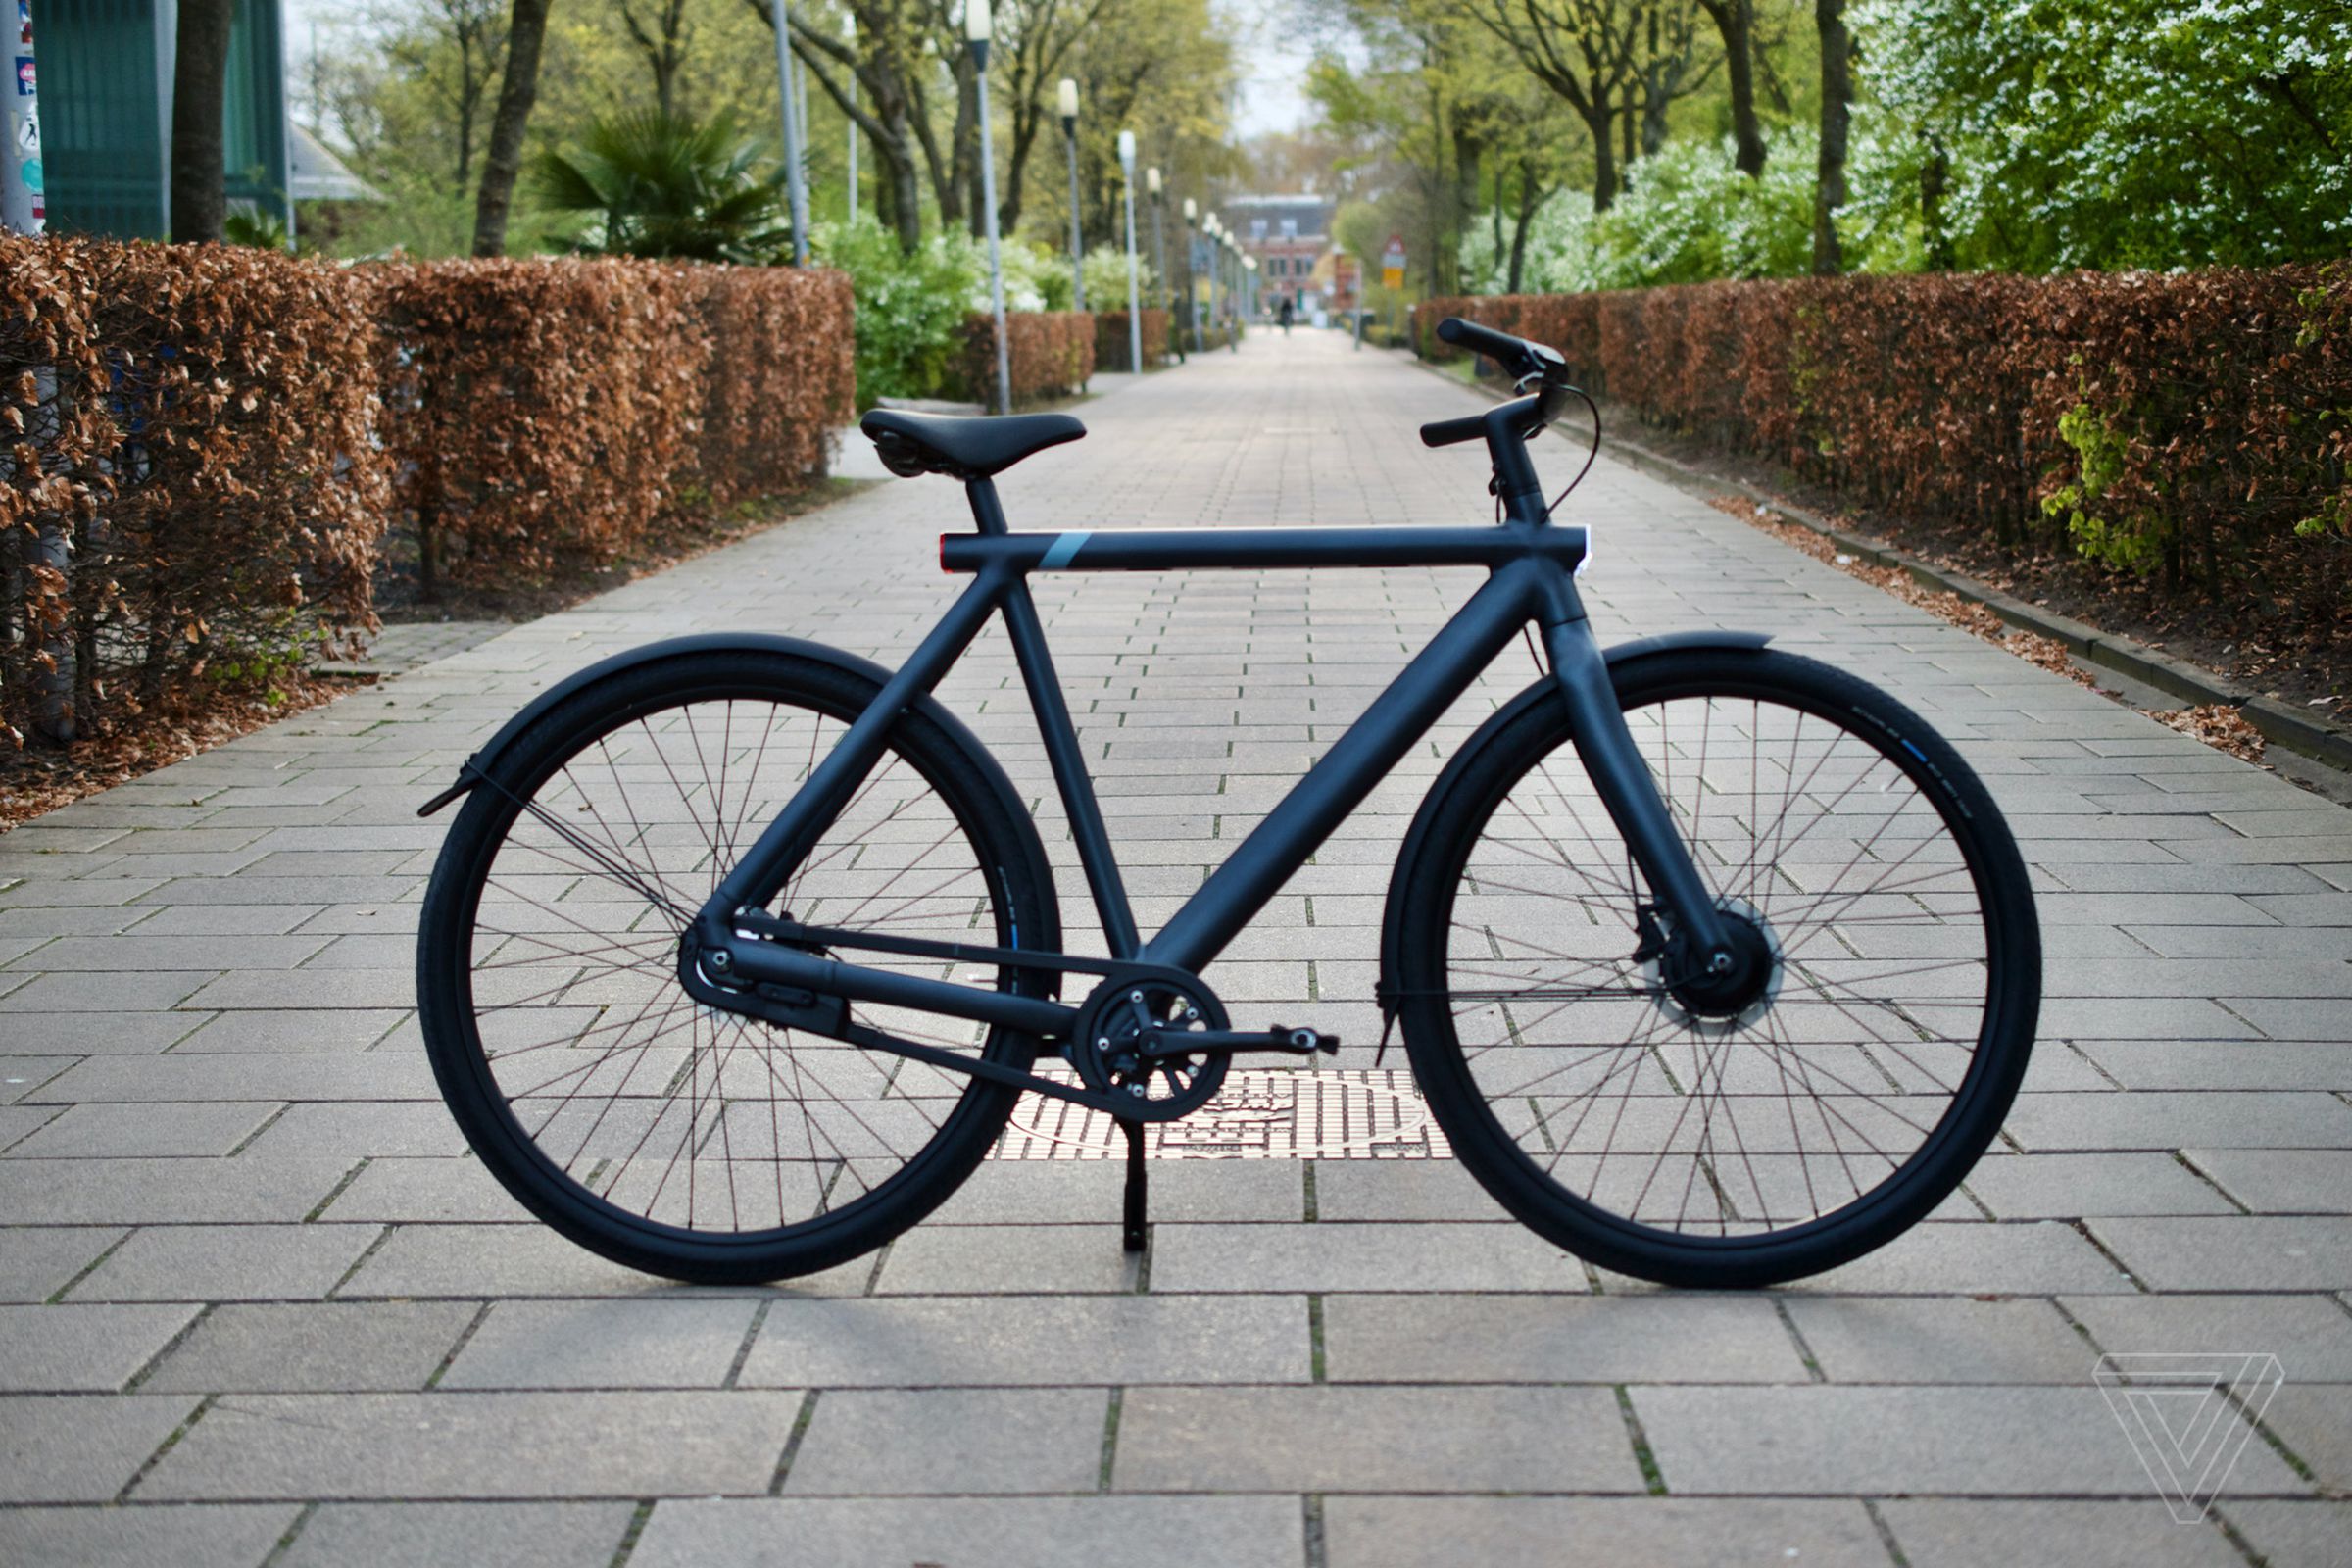 It’s the end of the road for VanMoof as we know it.